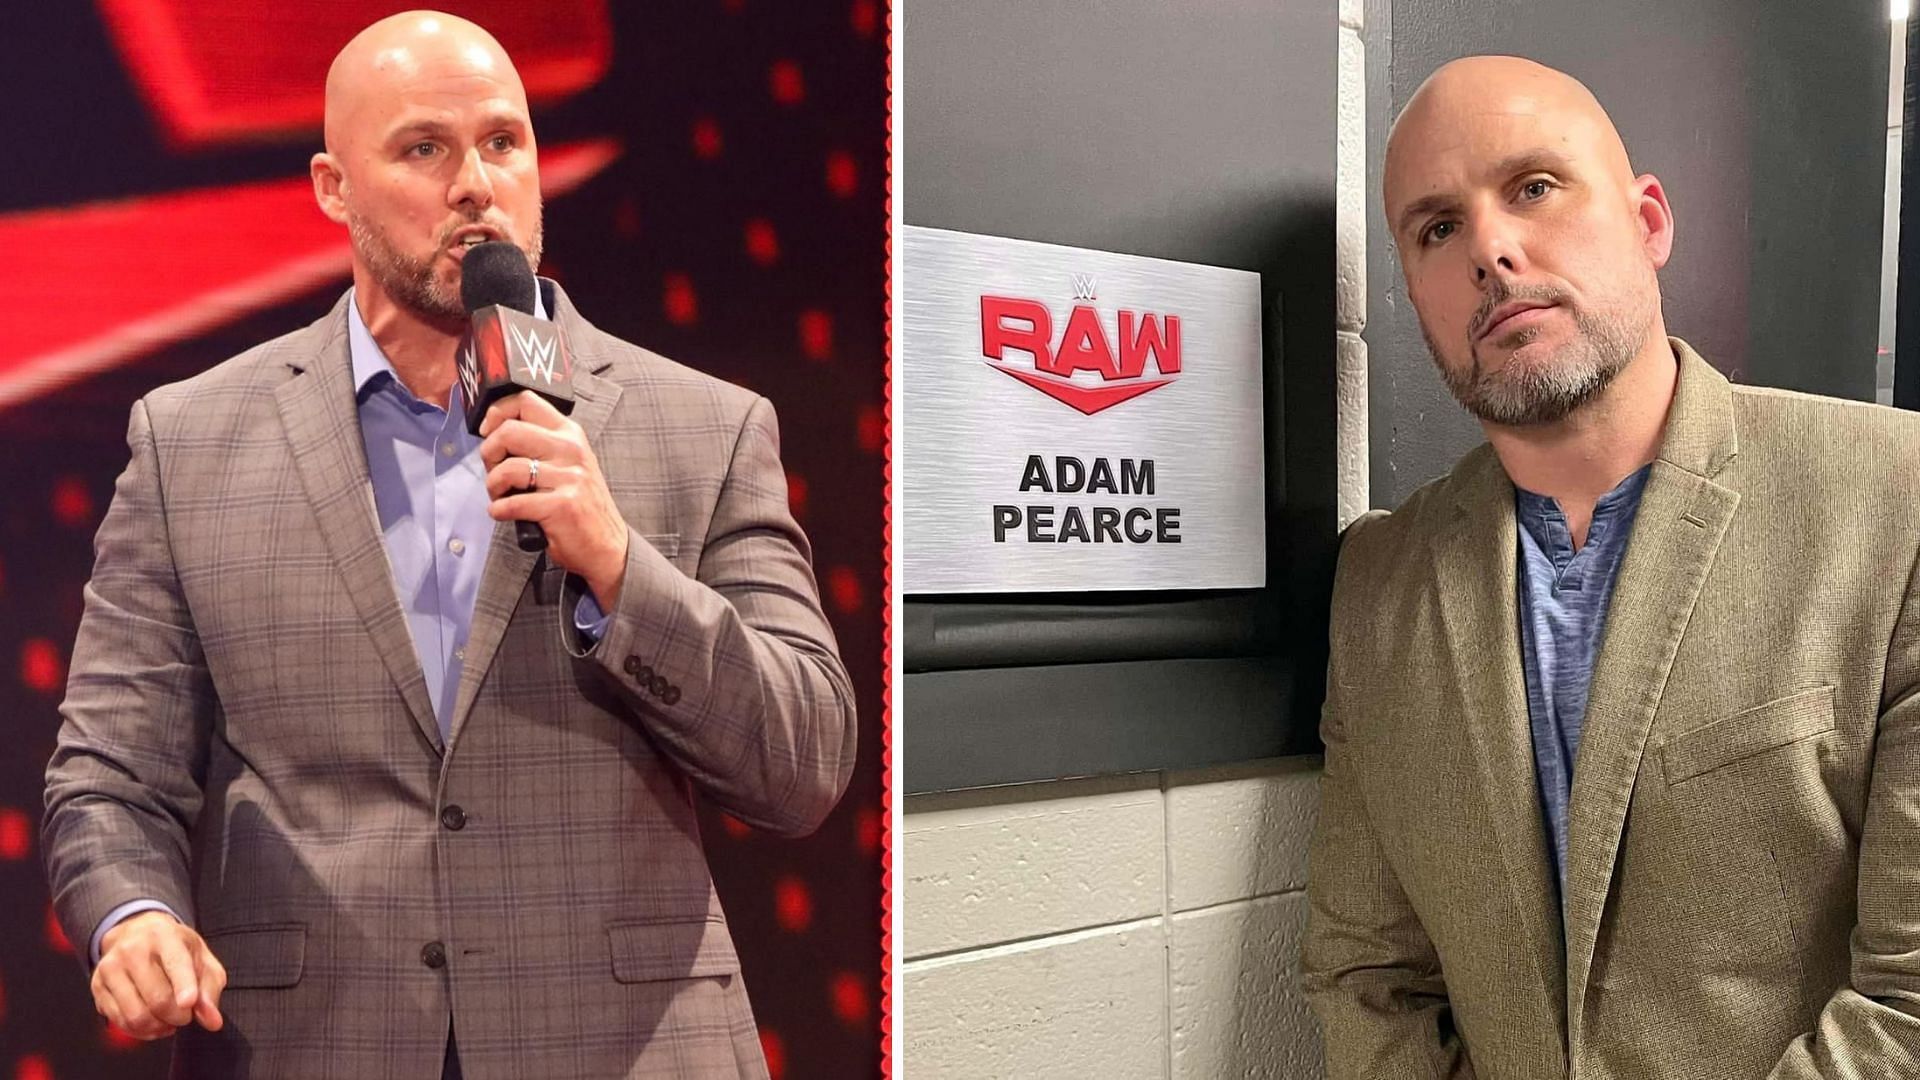 Pearce serves as the GM of RAW.